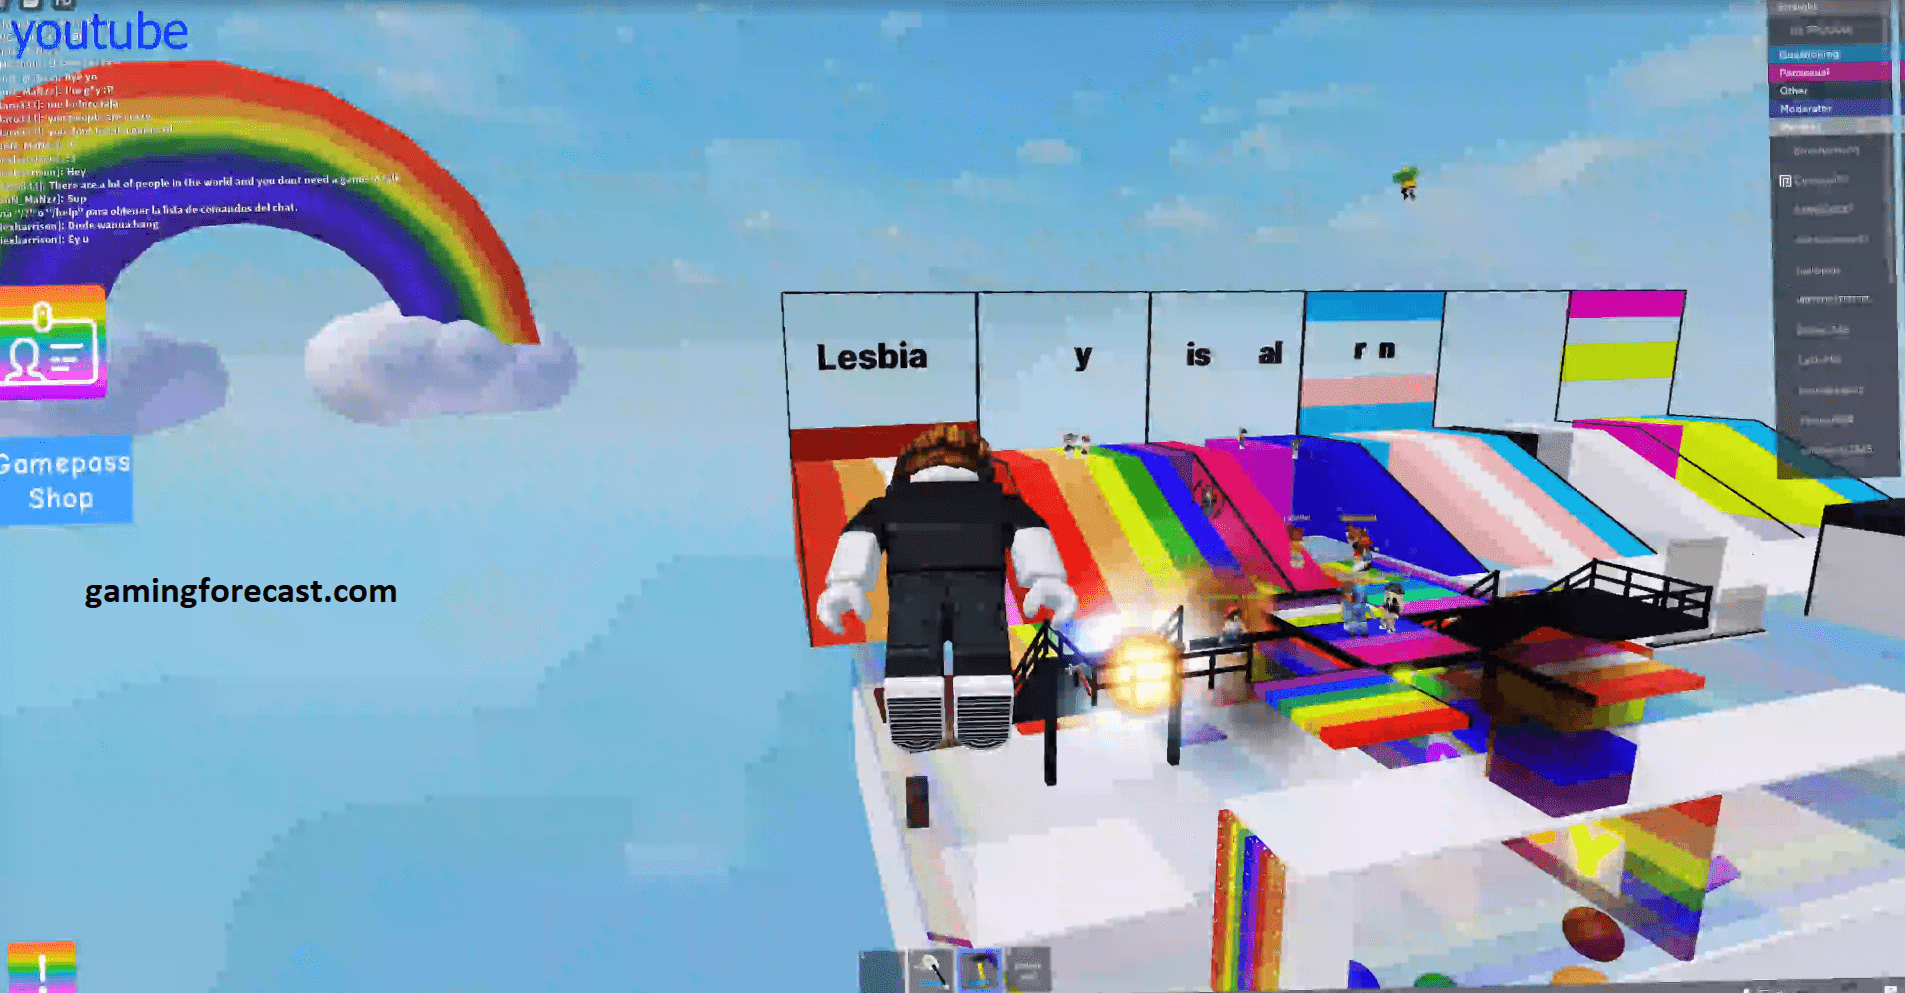 Roblox Hack Download Pc Destroy Lobby Fly Aimbot Scripts 2021 Gaming Forecast Download Free Online Game Hacks - fly me roblox hack